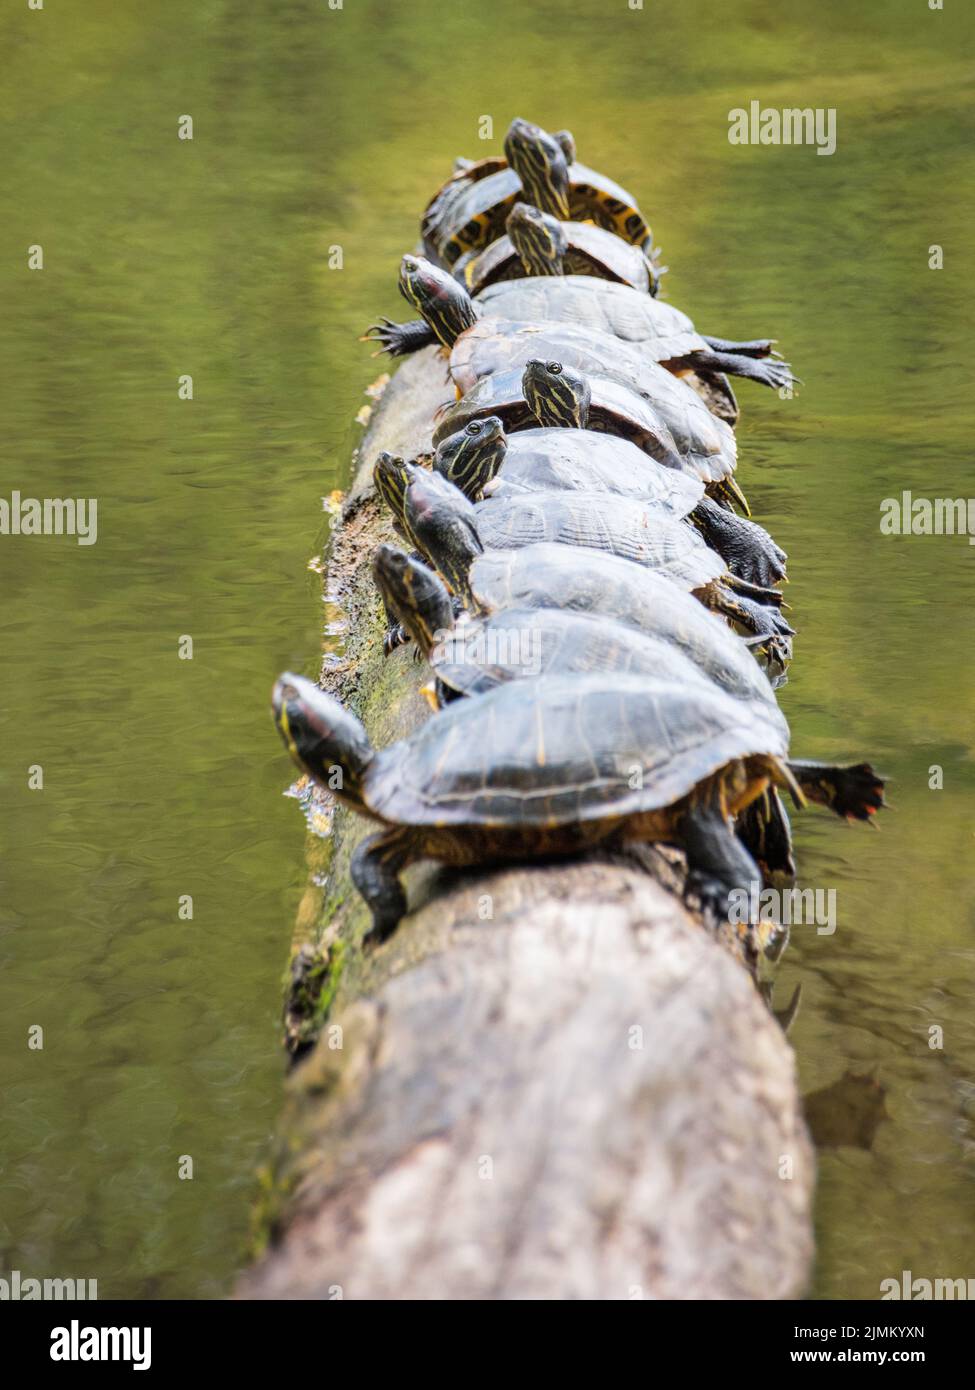 Many turtles sun themselves on a log in a pond Stock Photo